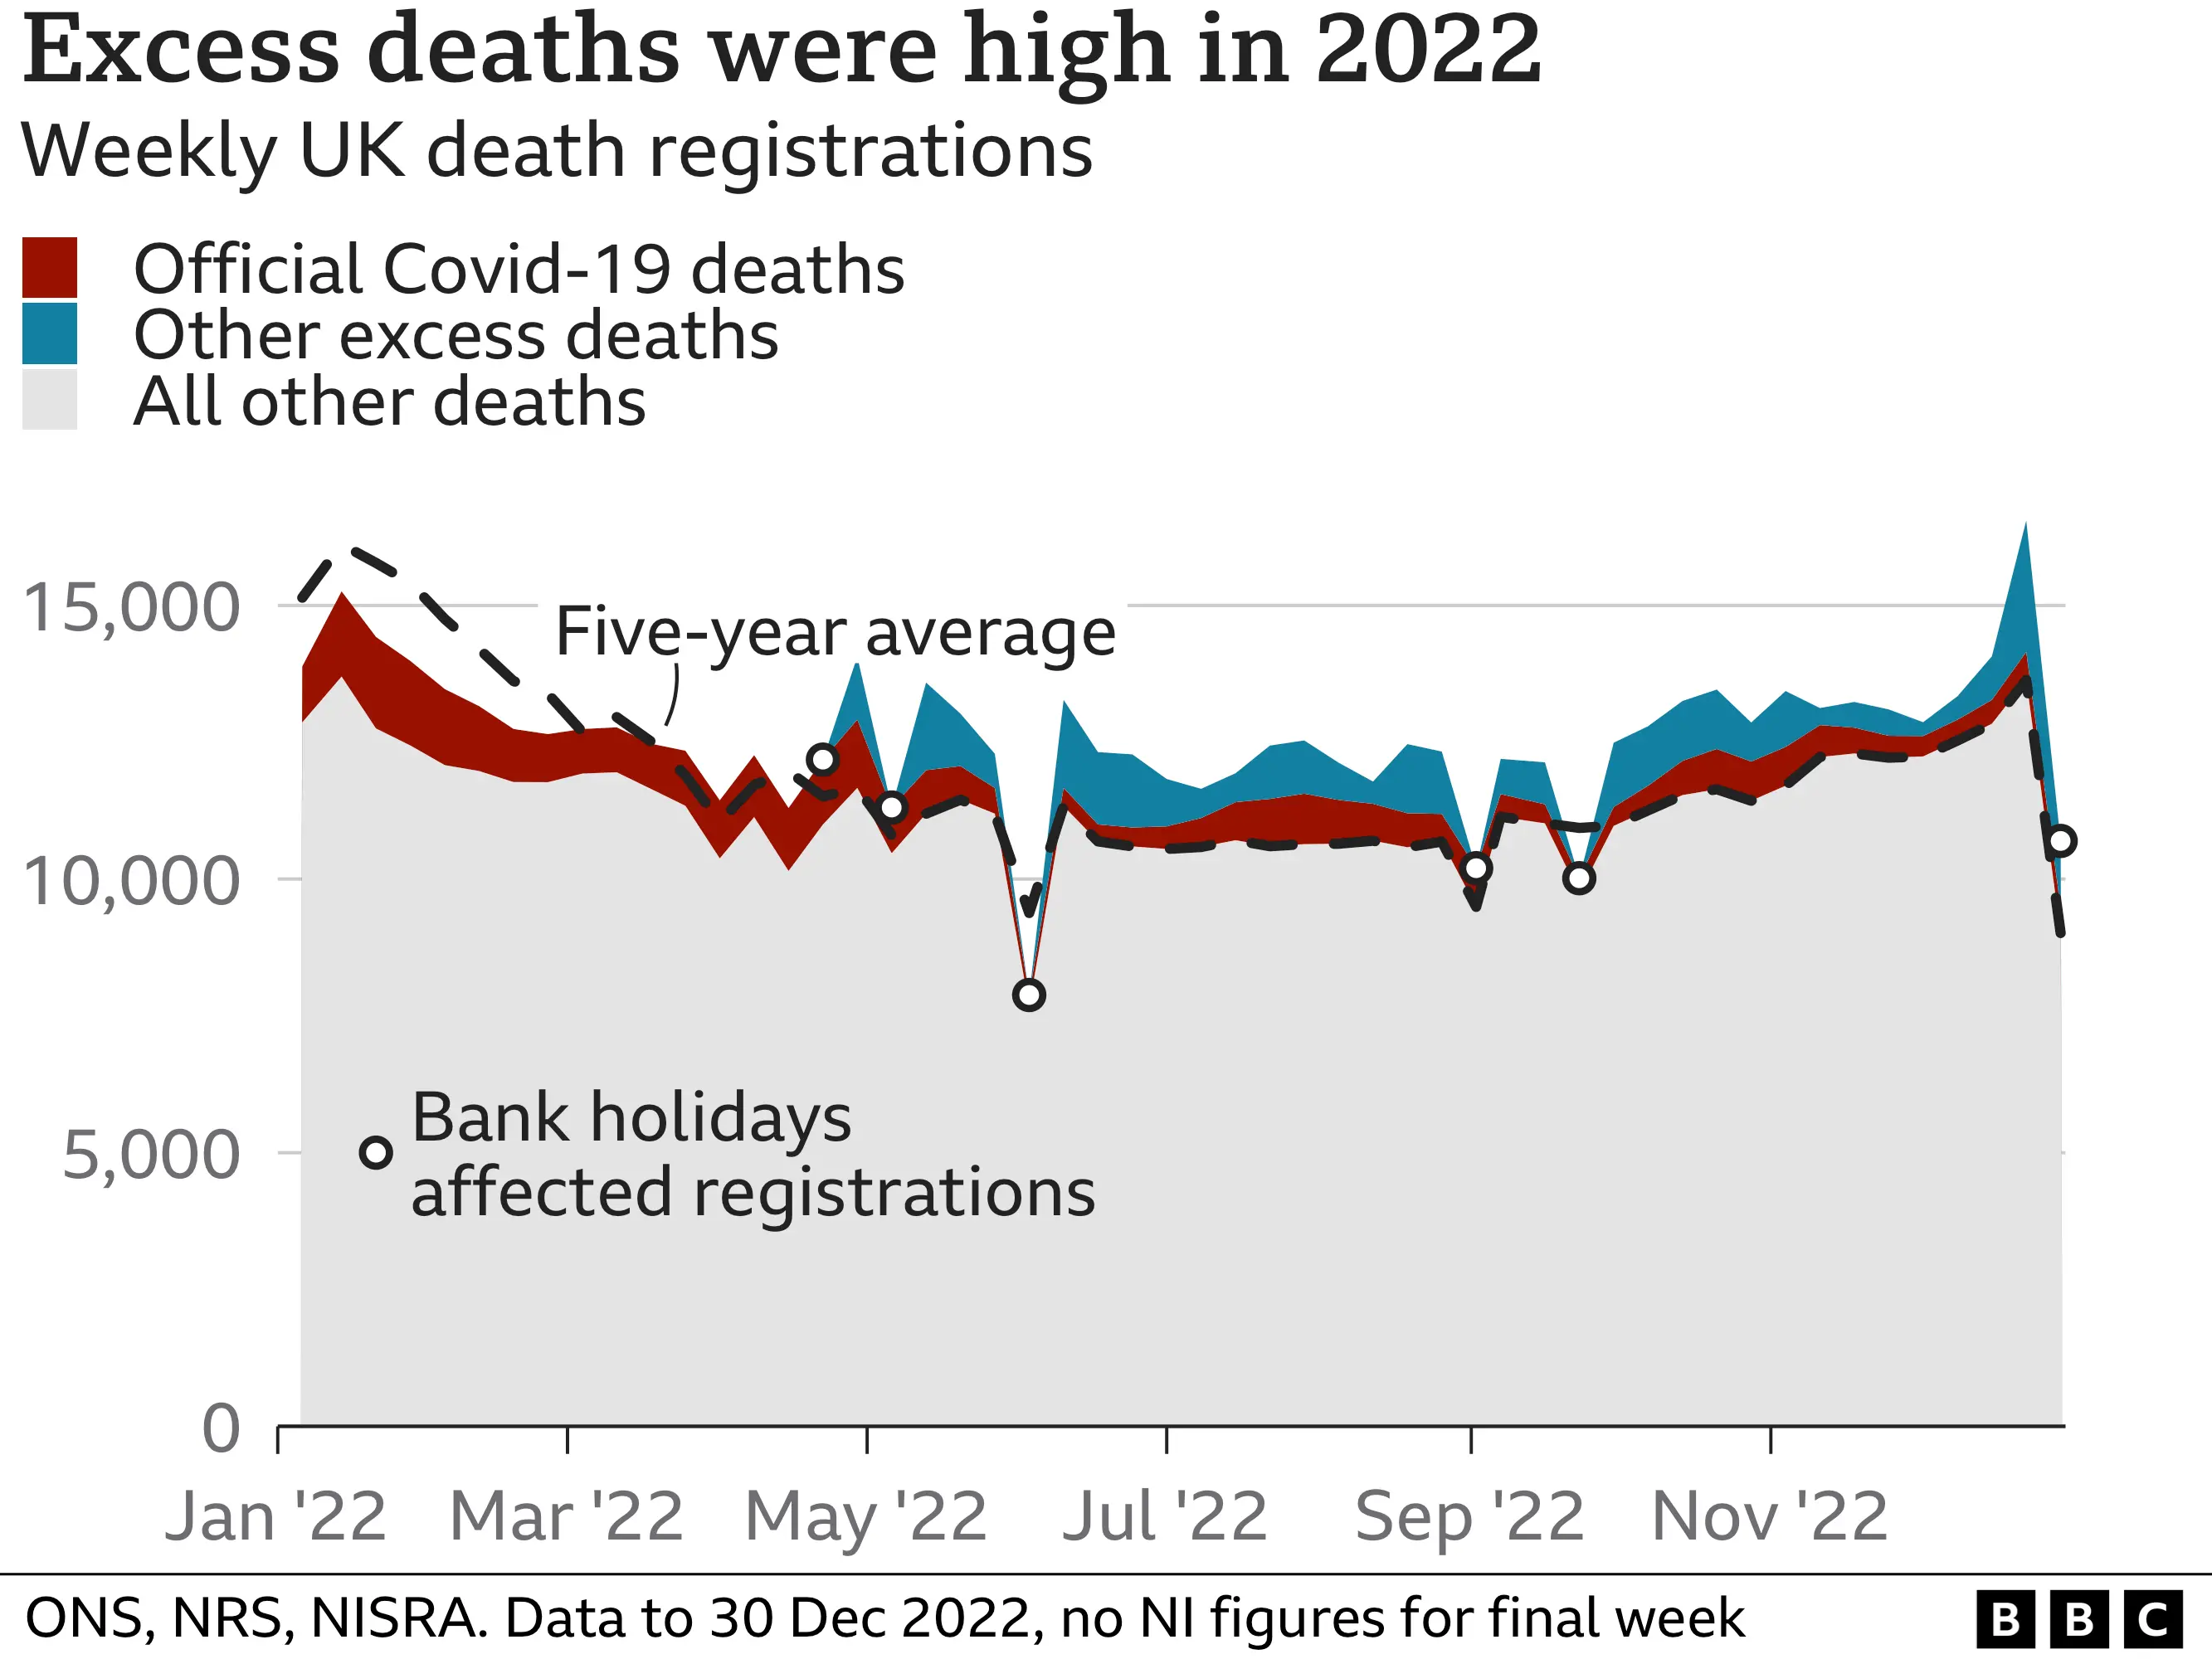 Excess deaths in 2022 among worst in 50 years